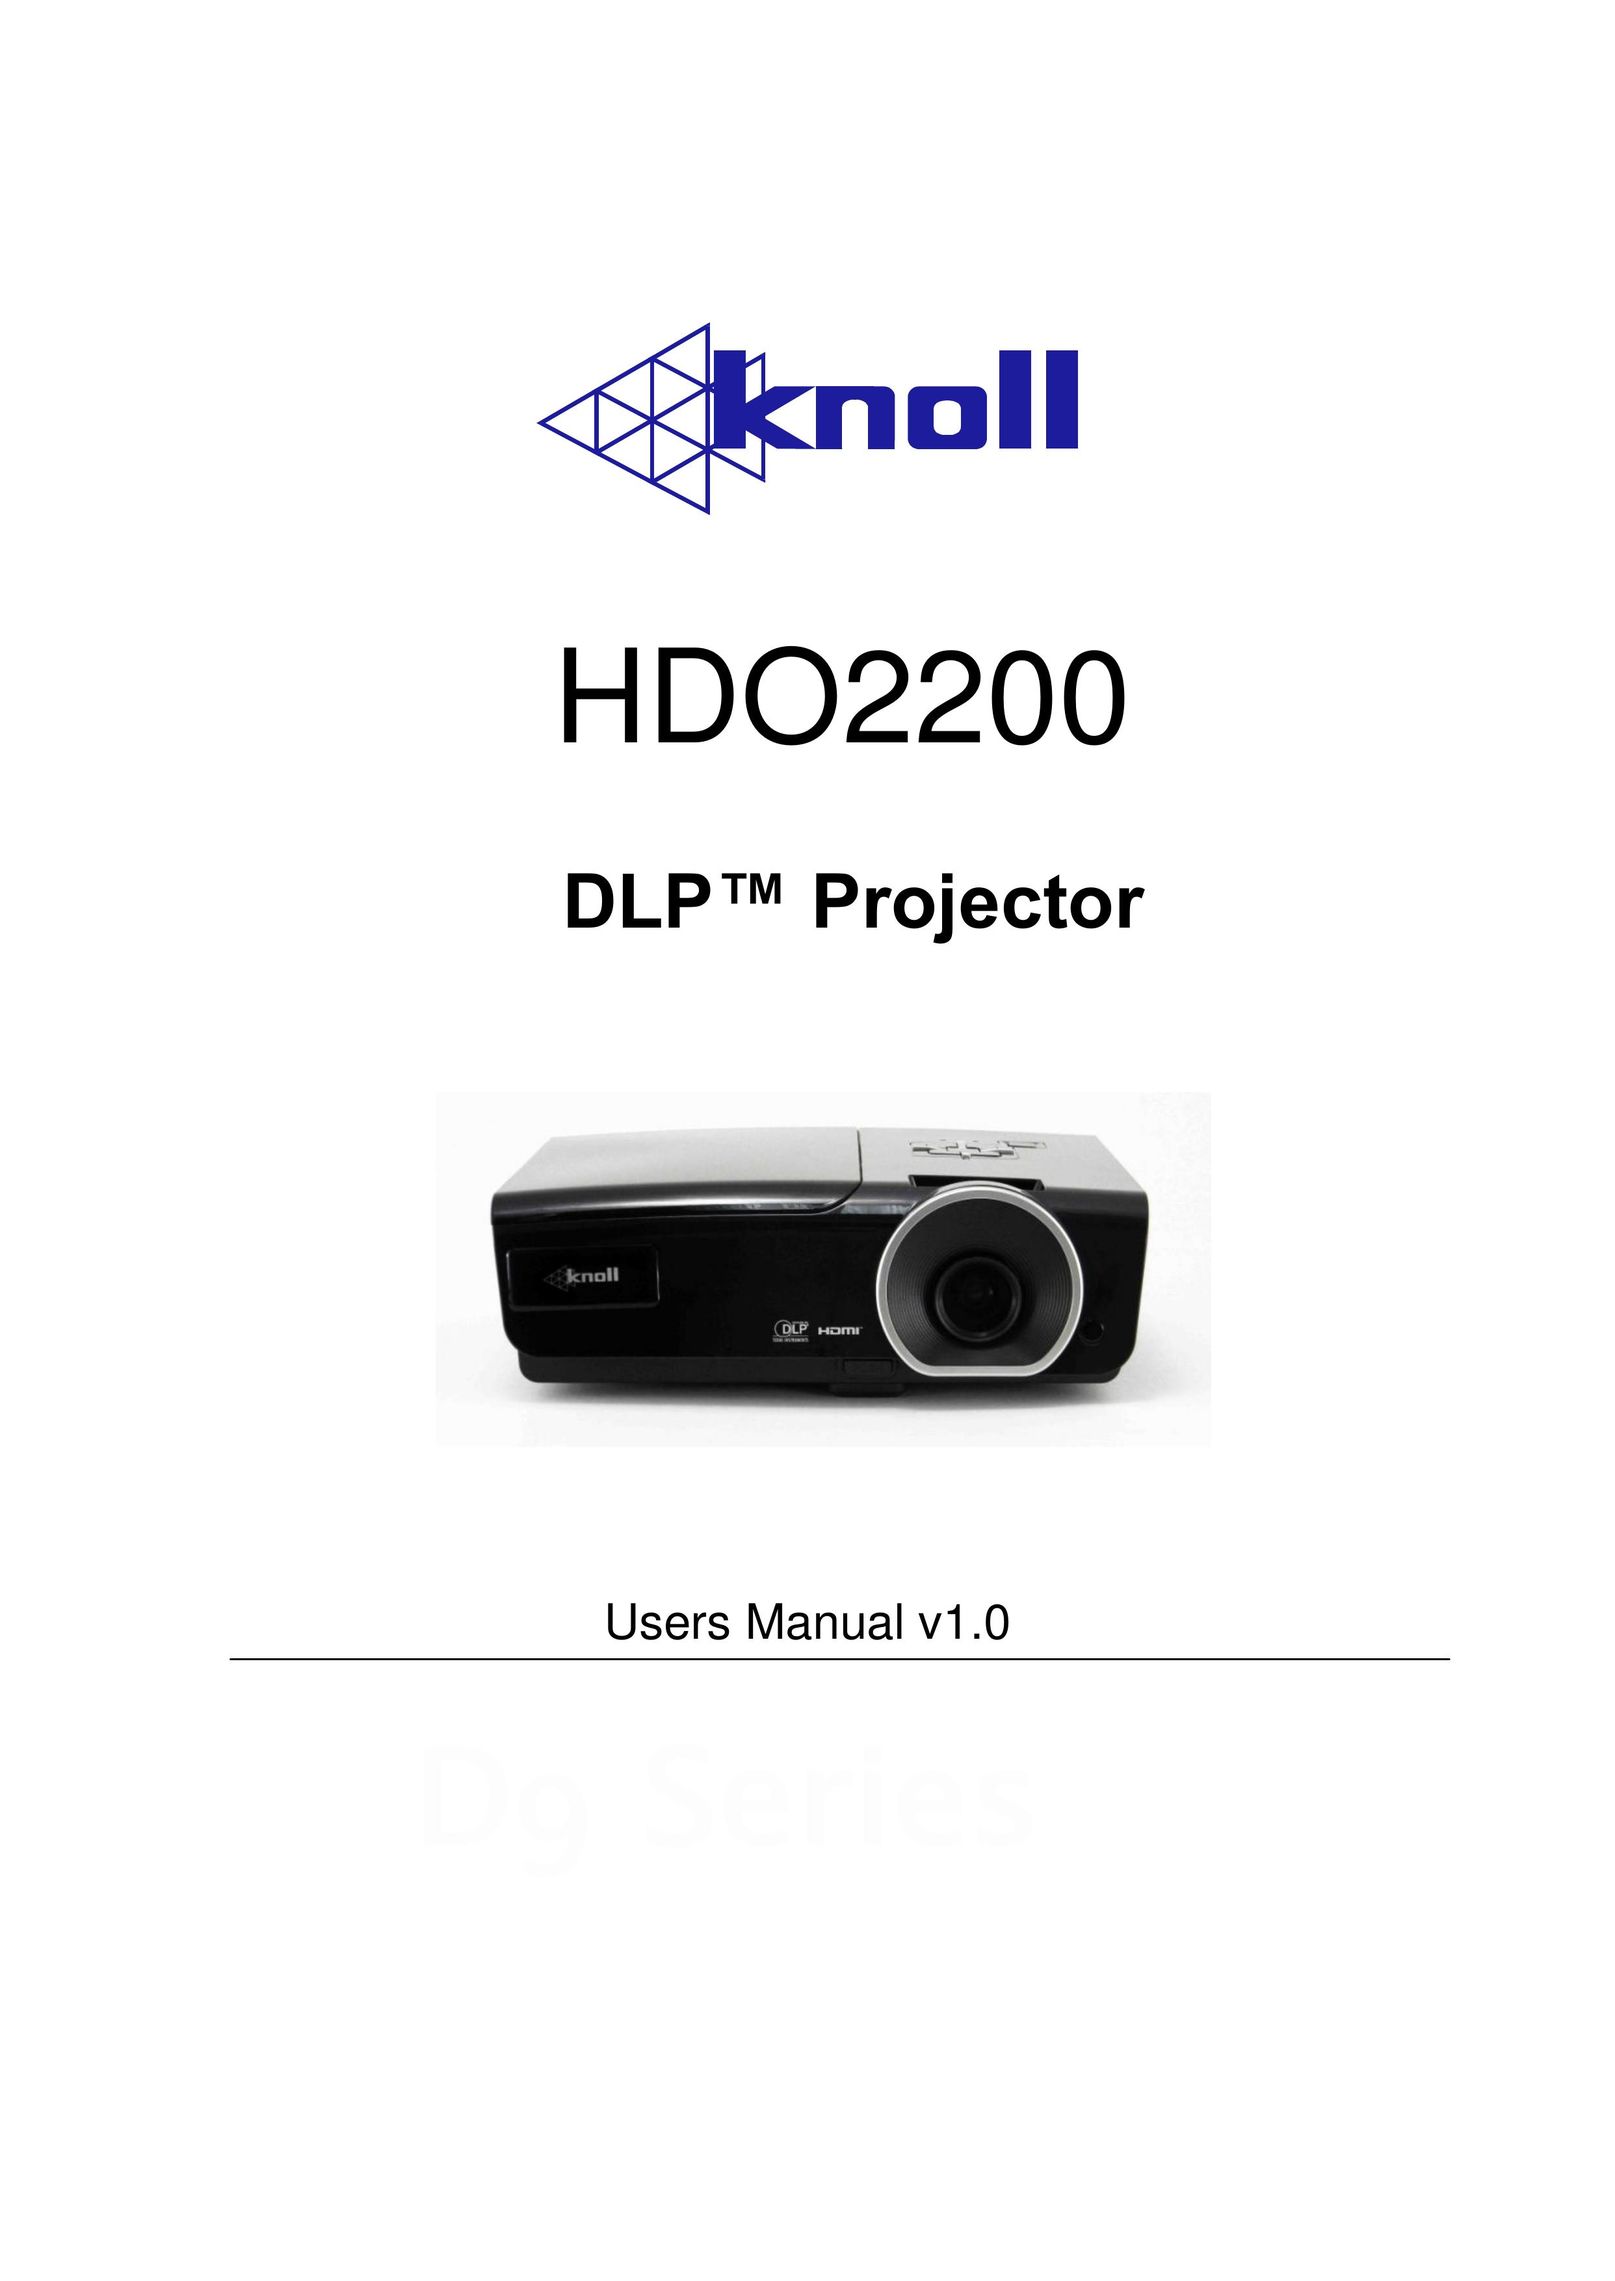 Knoll Systems HDO2200 Projector User Manual